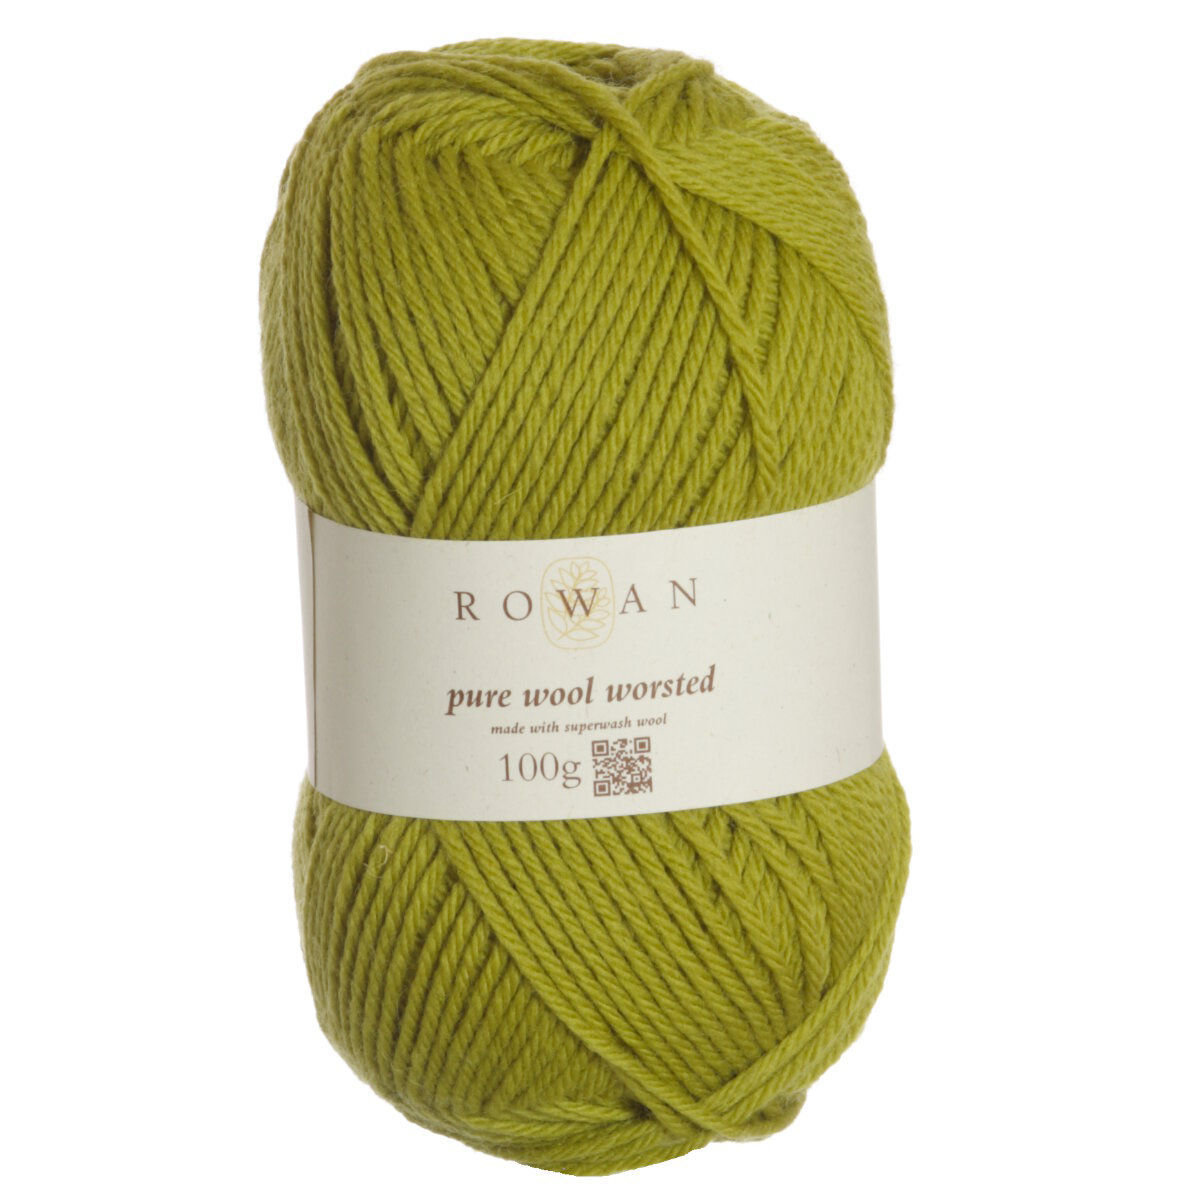 PURE WOOL WORSTED